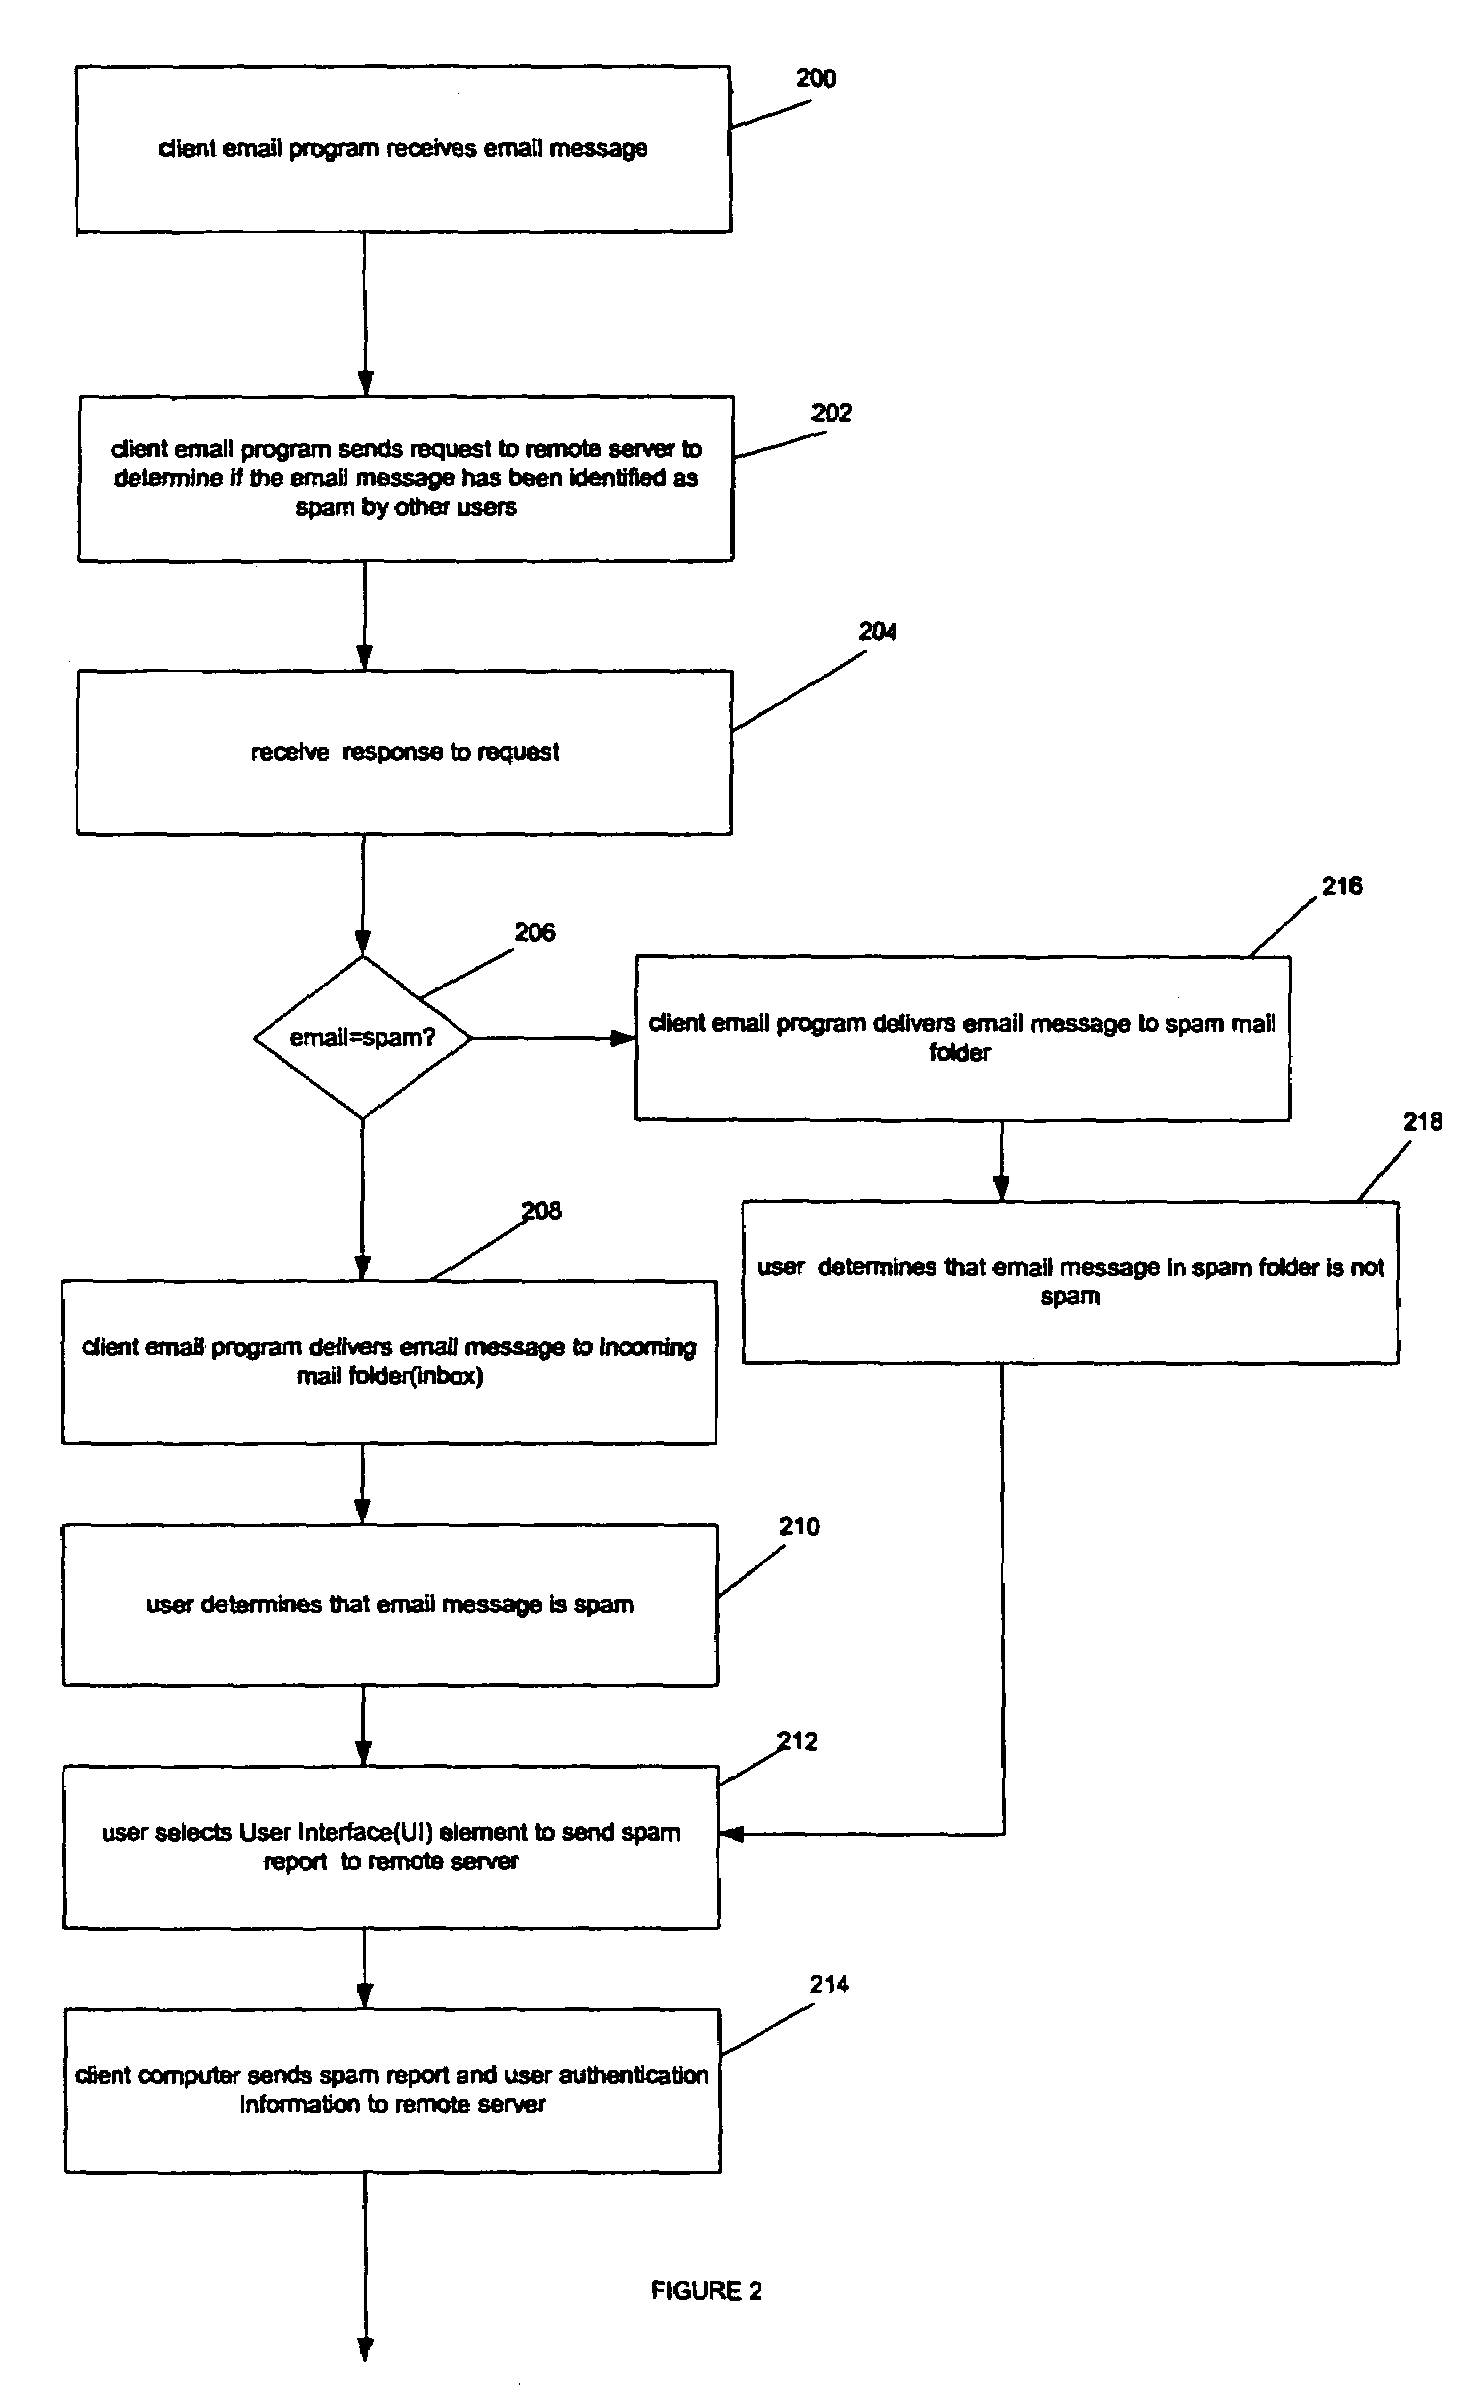 Method and apparatus to block spam based on spam reports from a community of users